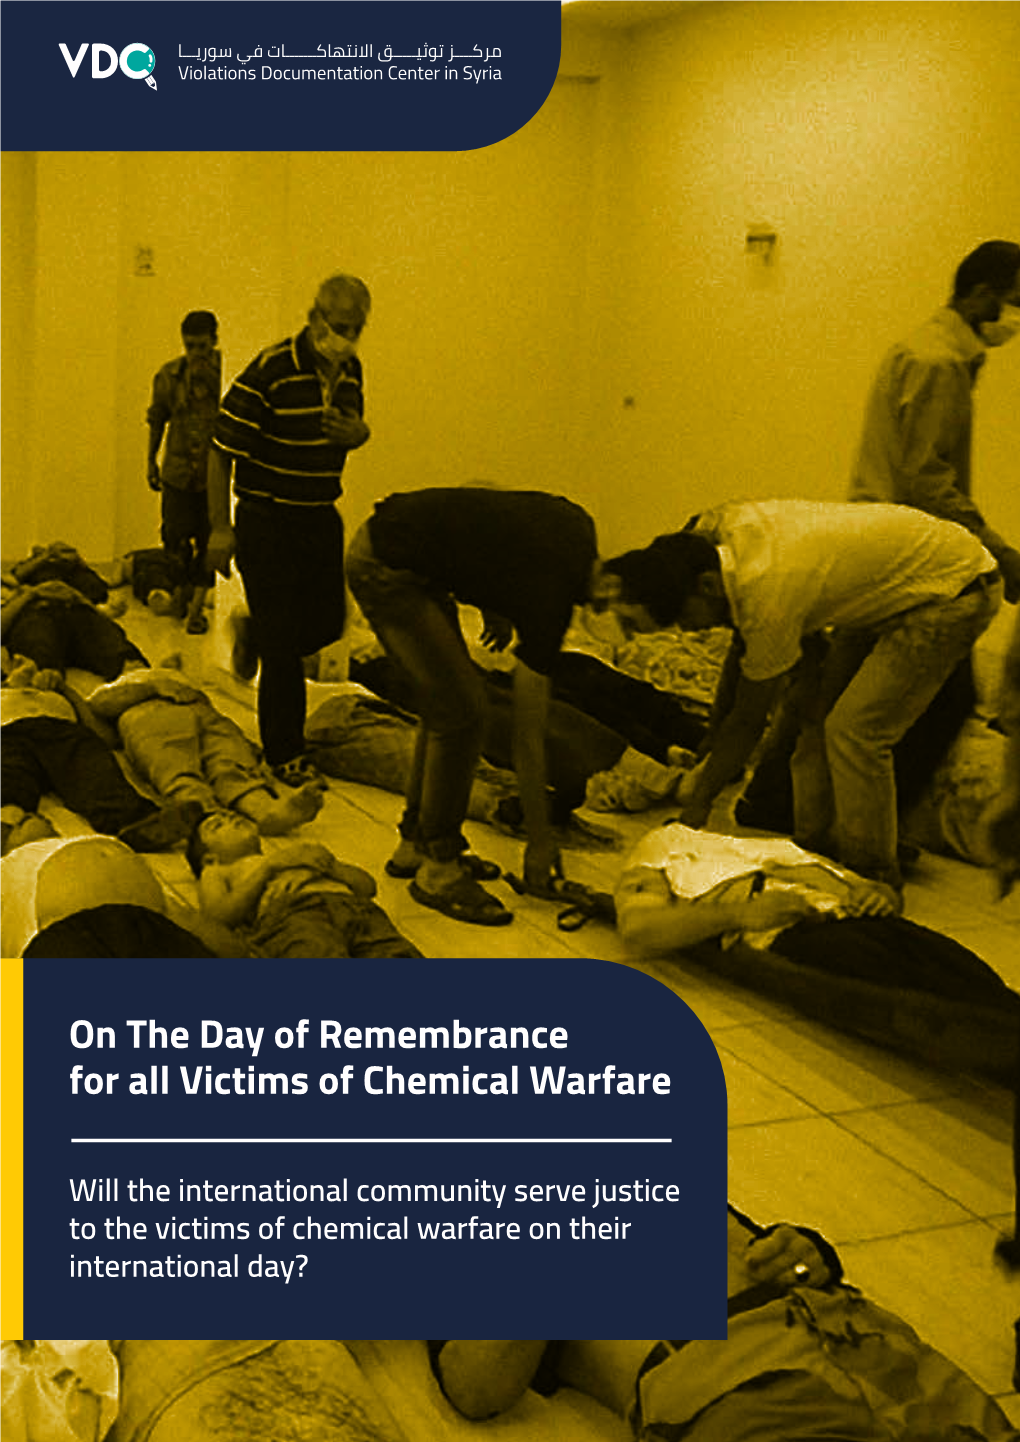 On the Day of Remembrance for All Victims of Chemical Warfare